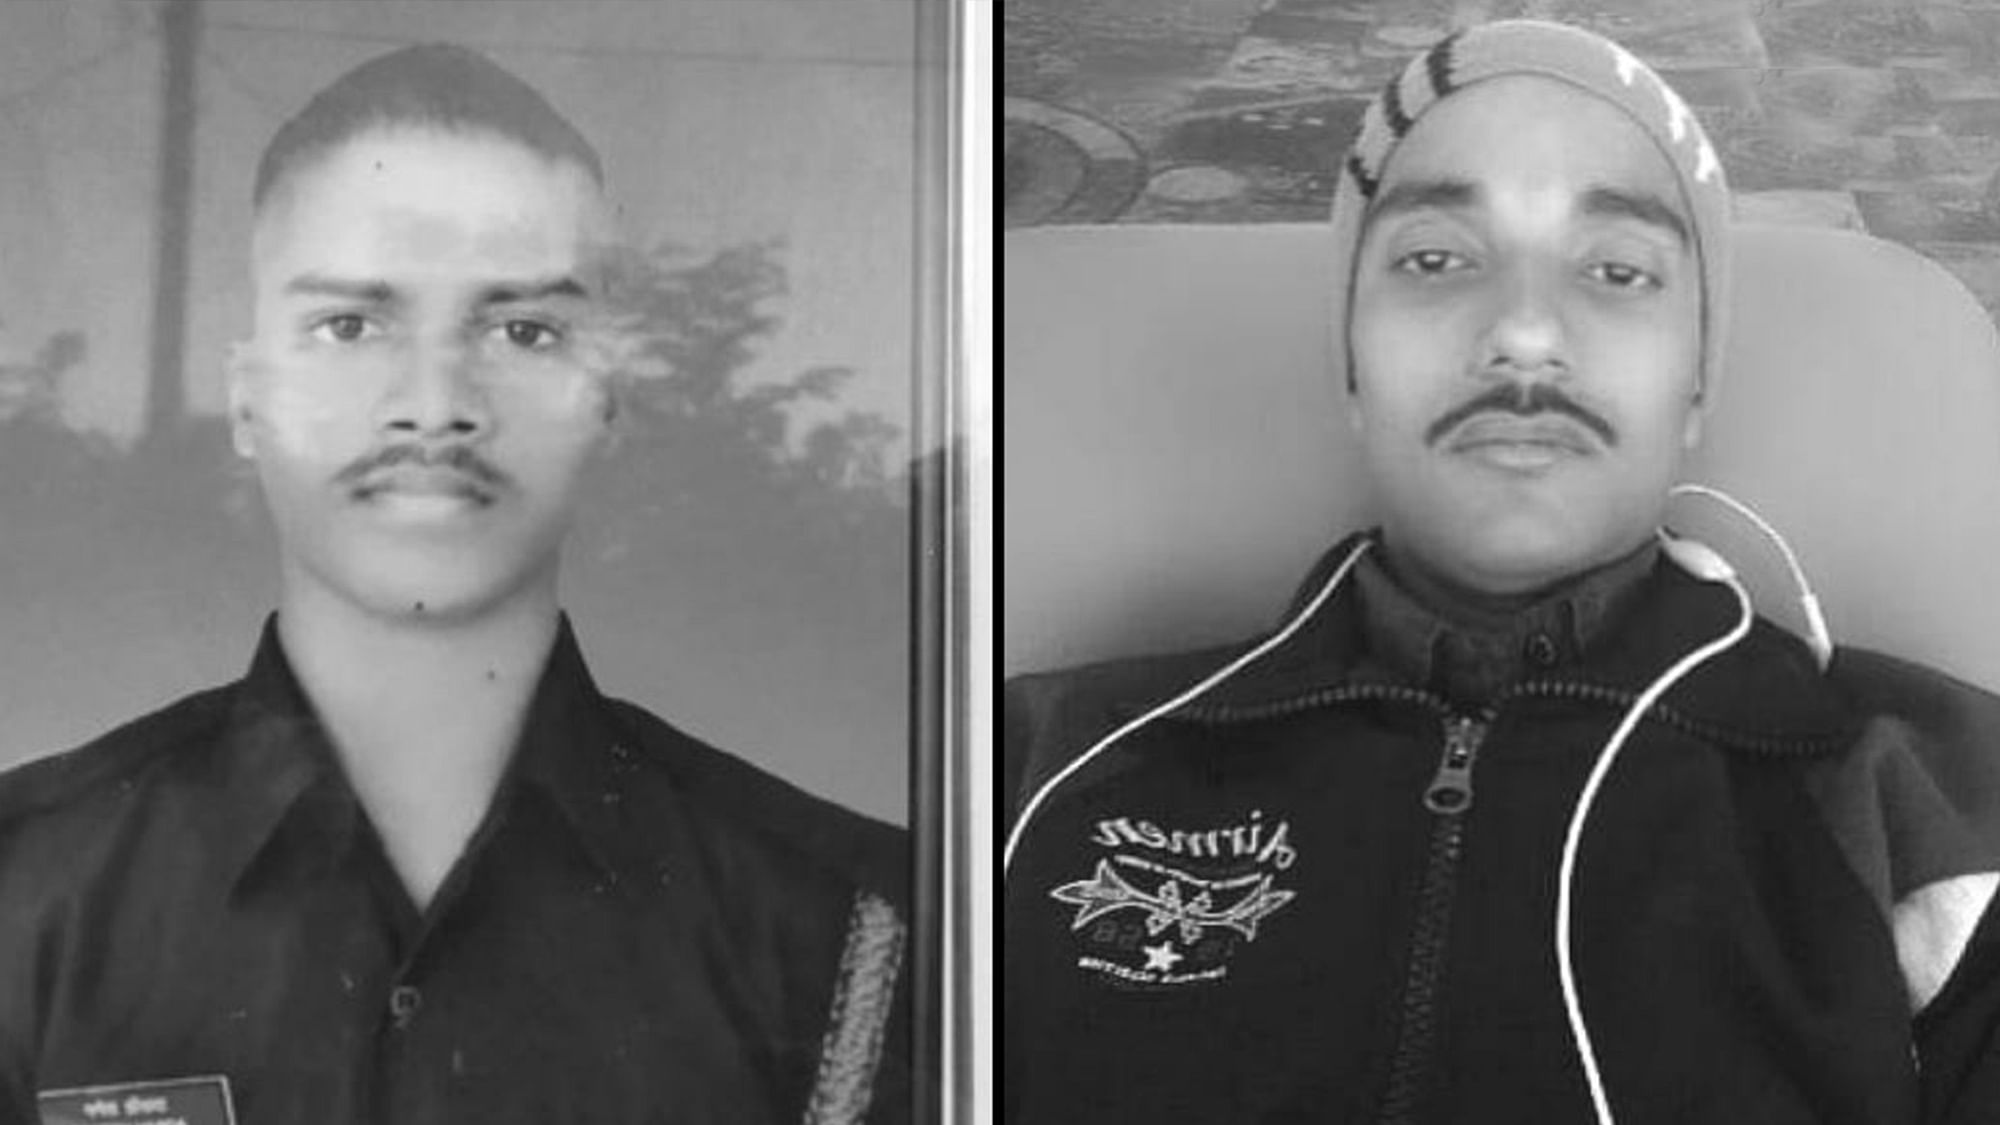 Two jawans from Jharkhand who were killed at the Galwan Valley.